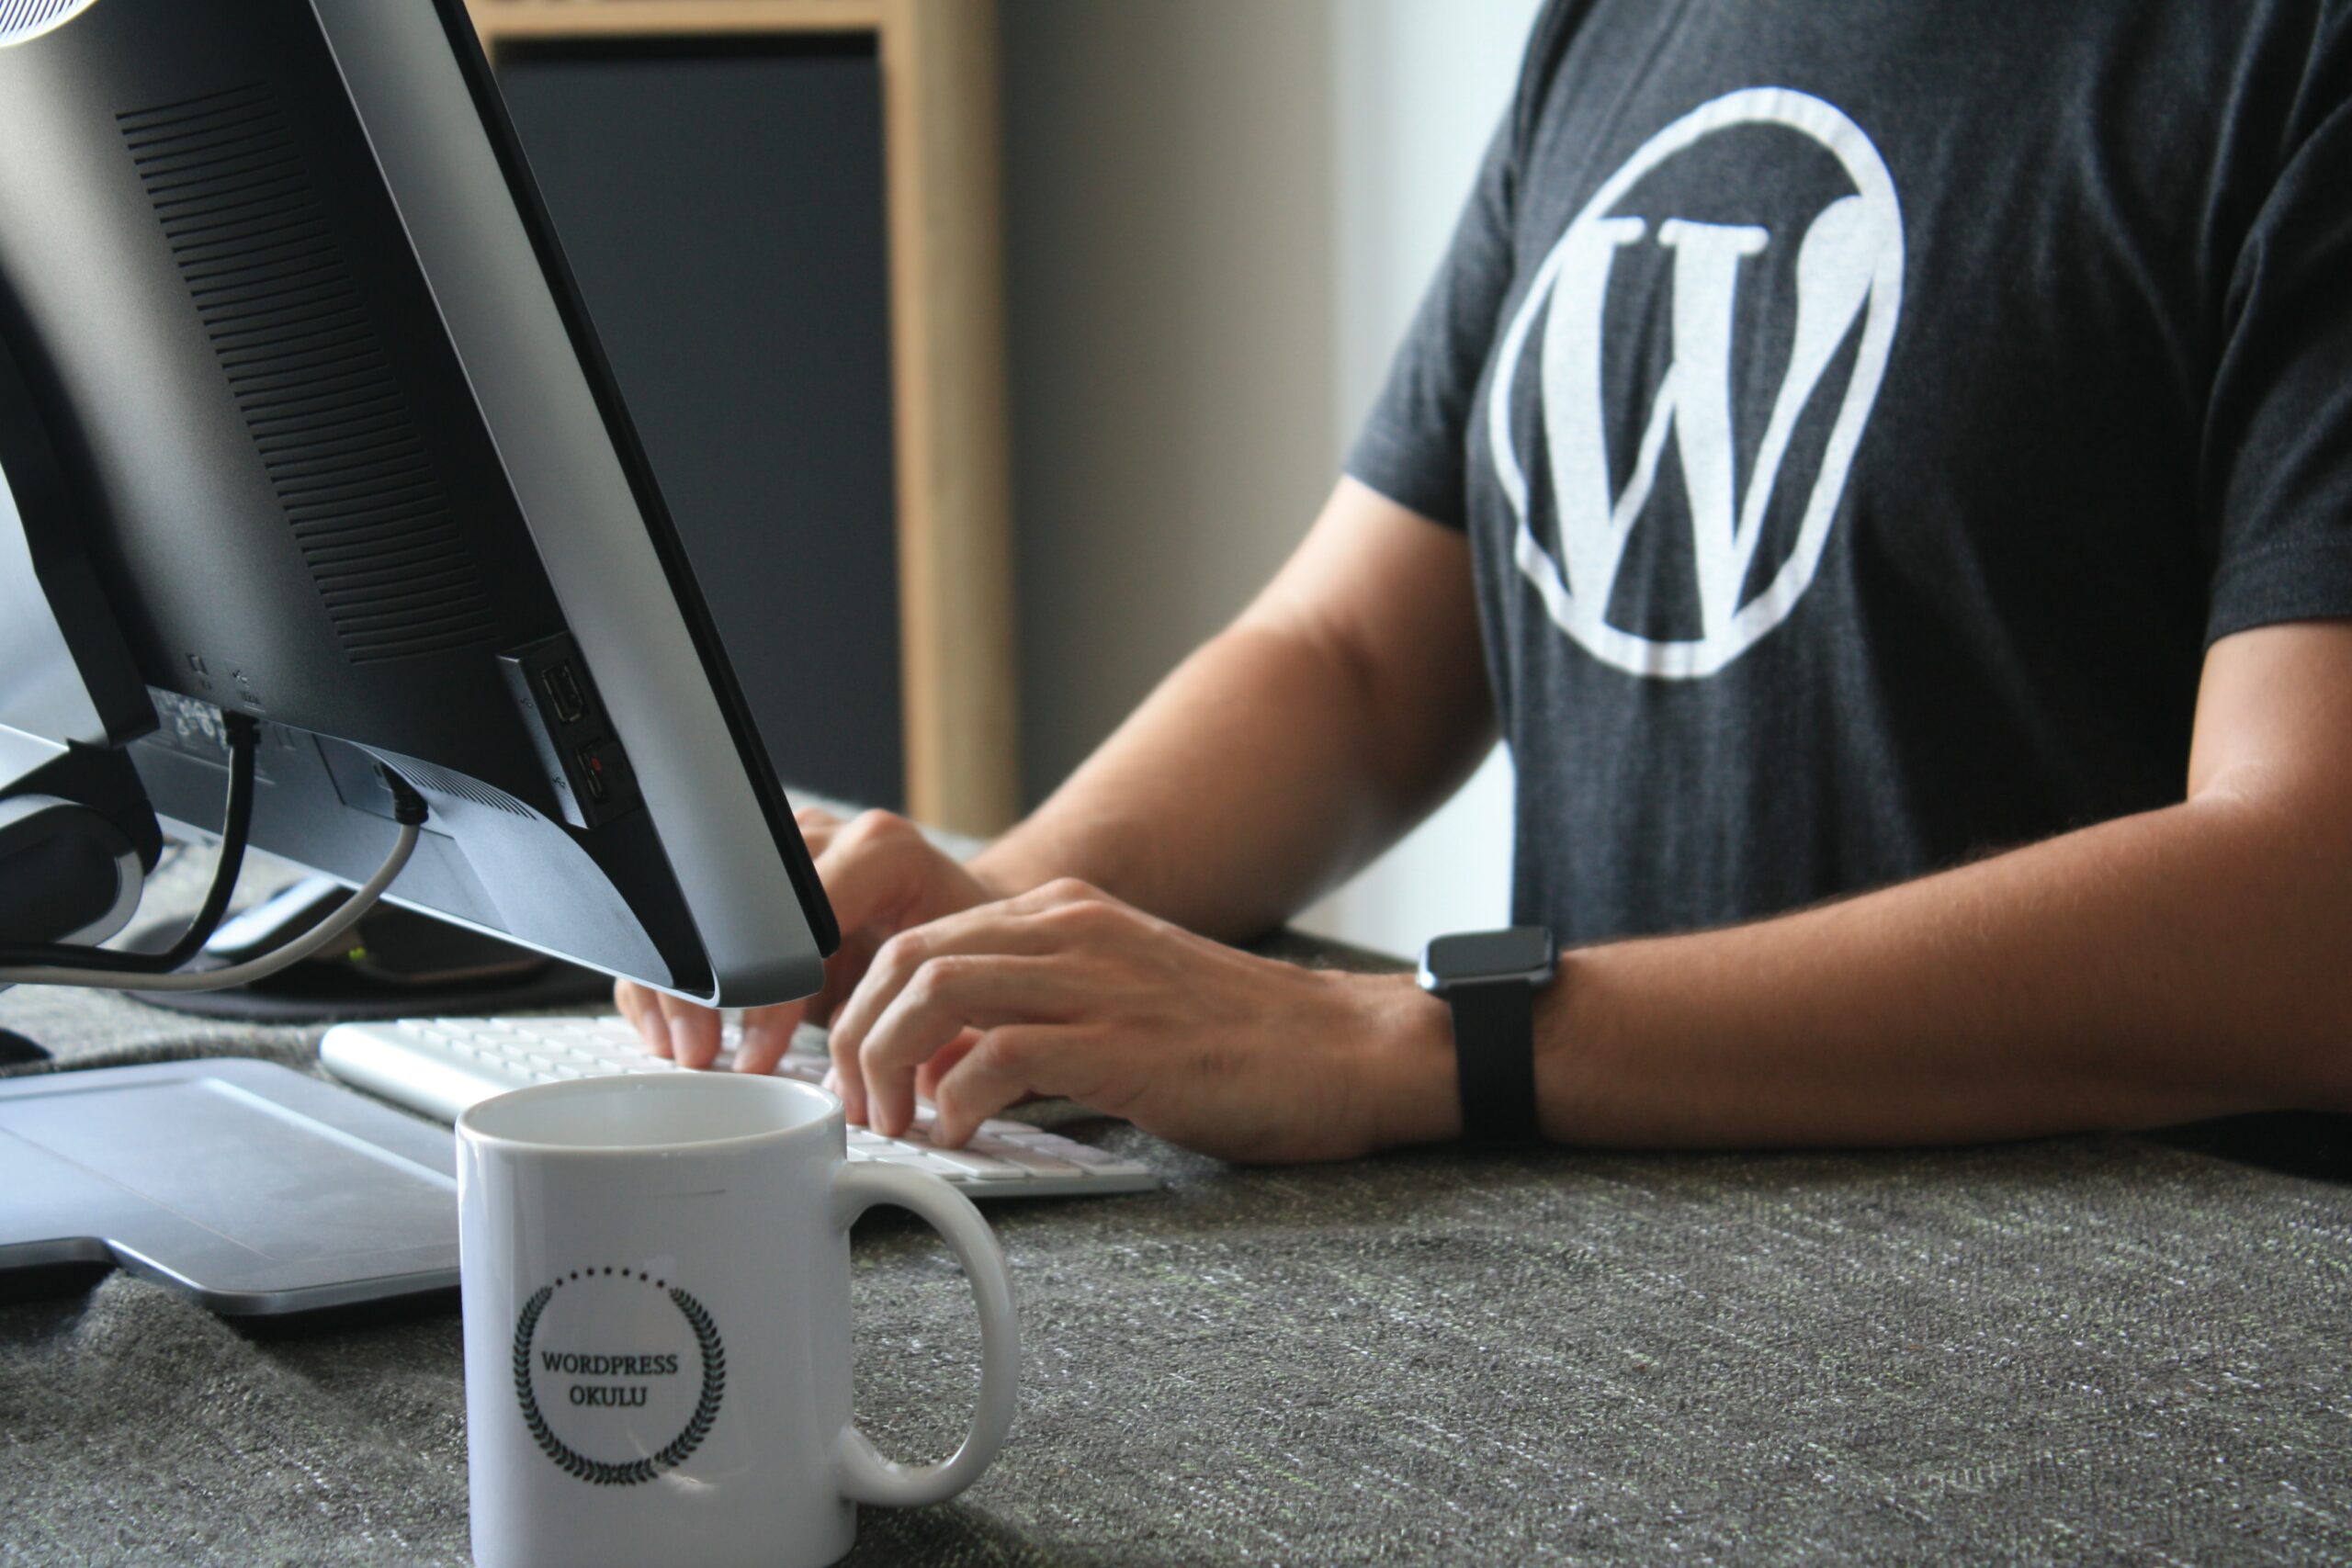 WordPress Security Scan: What It Is and How It Helps Secure Your Site